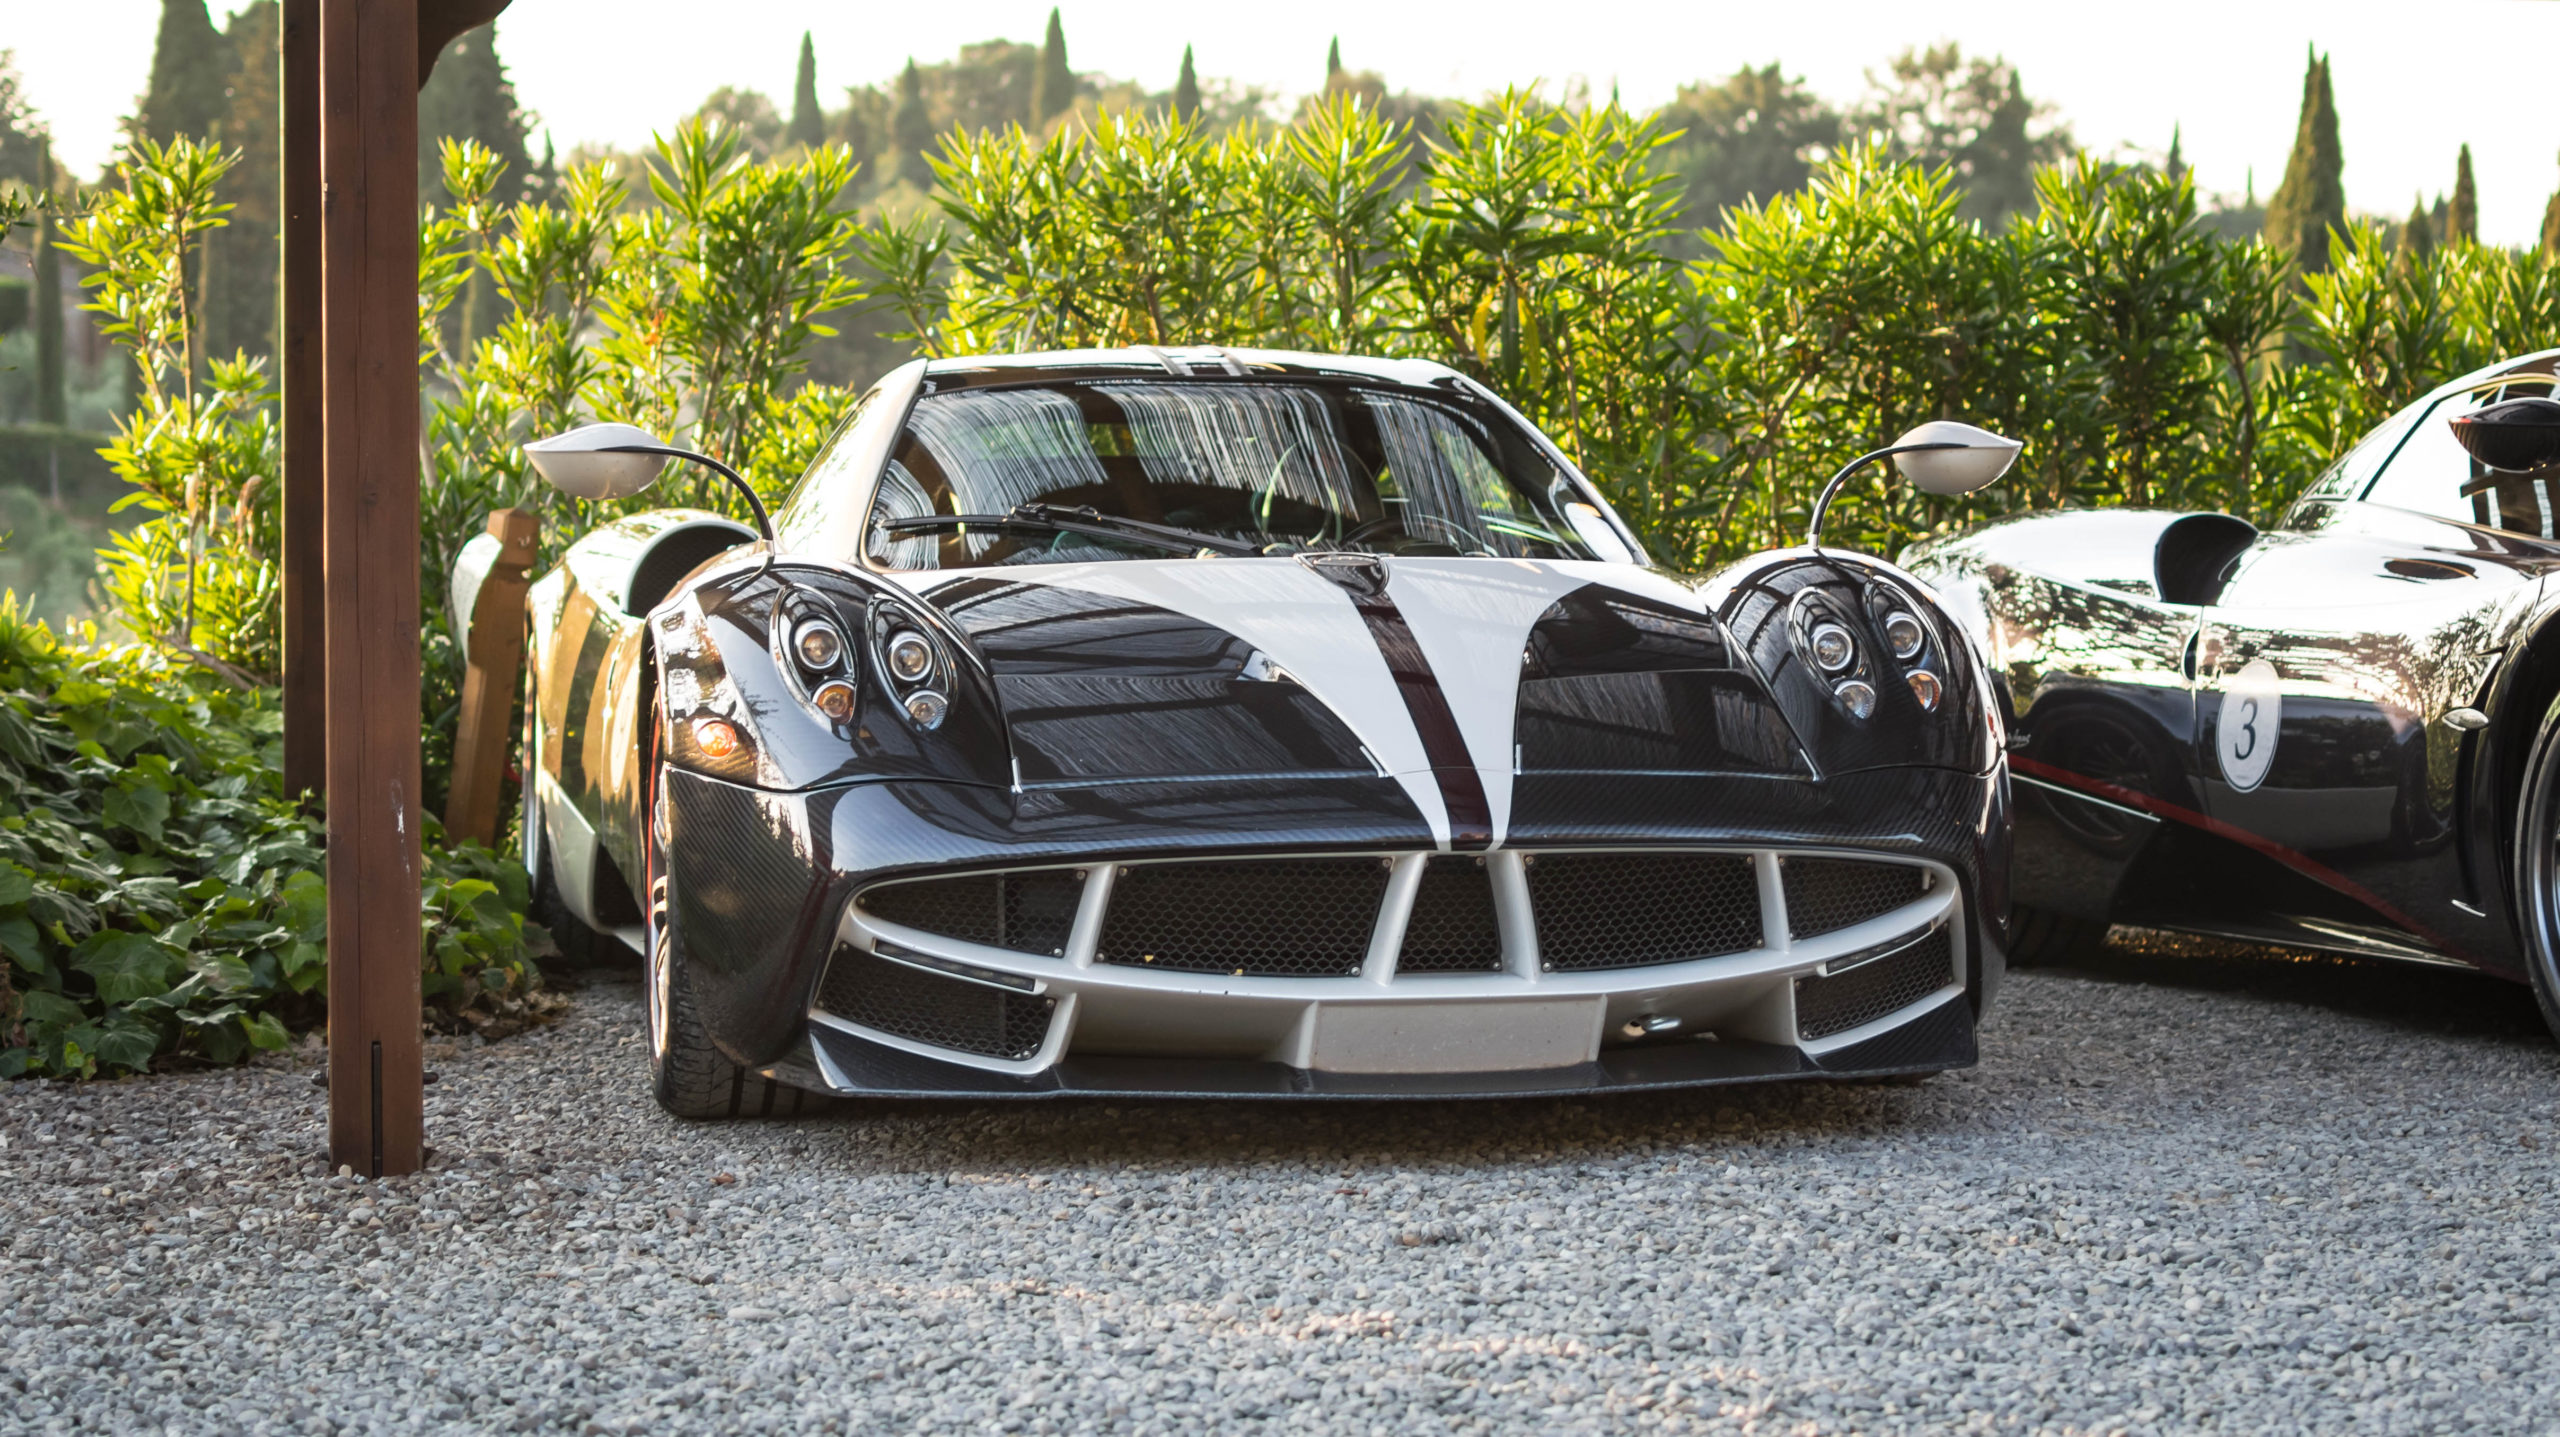 A Pagani Rally In Italy Puts All Other Car Meets To Shame